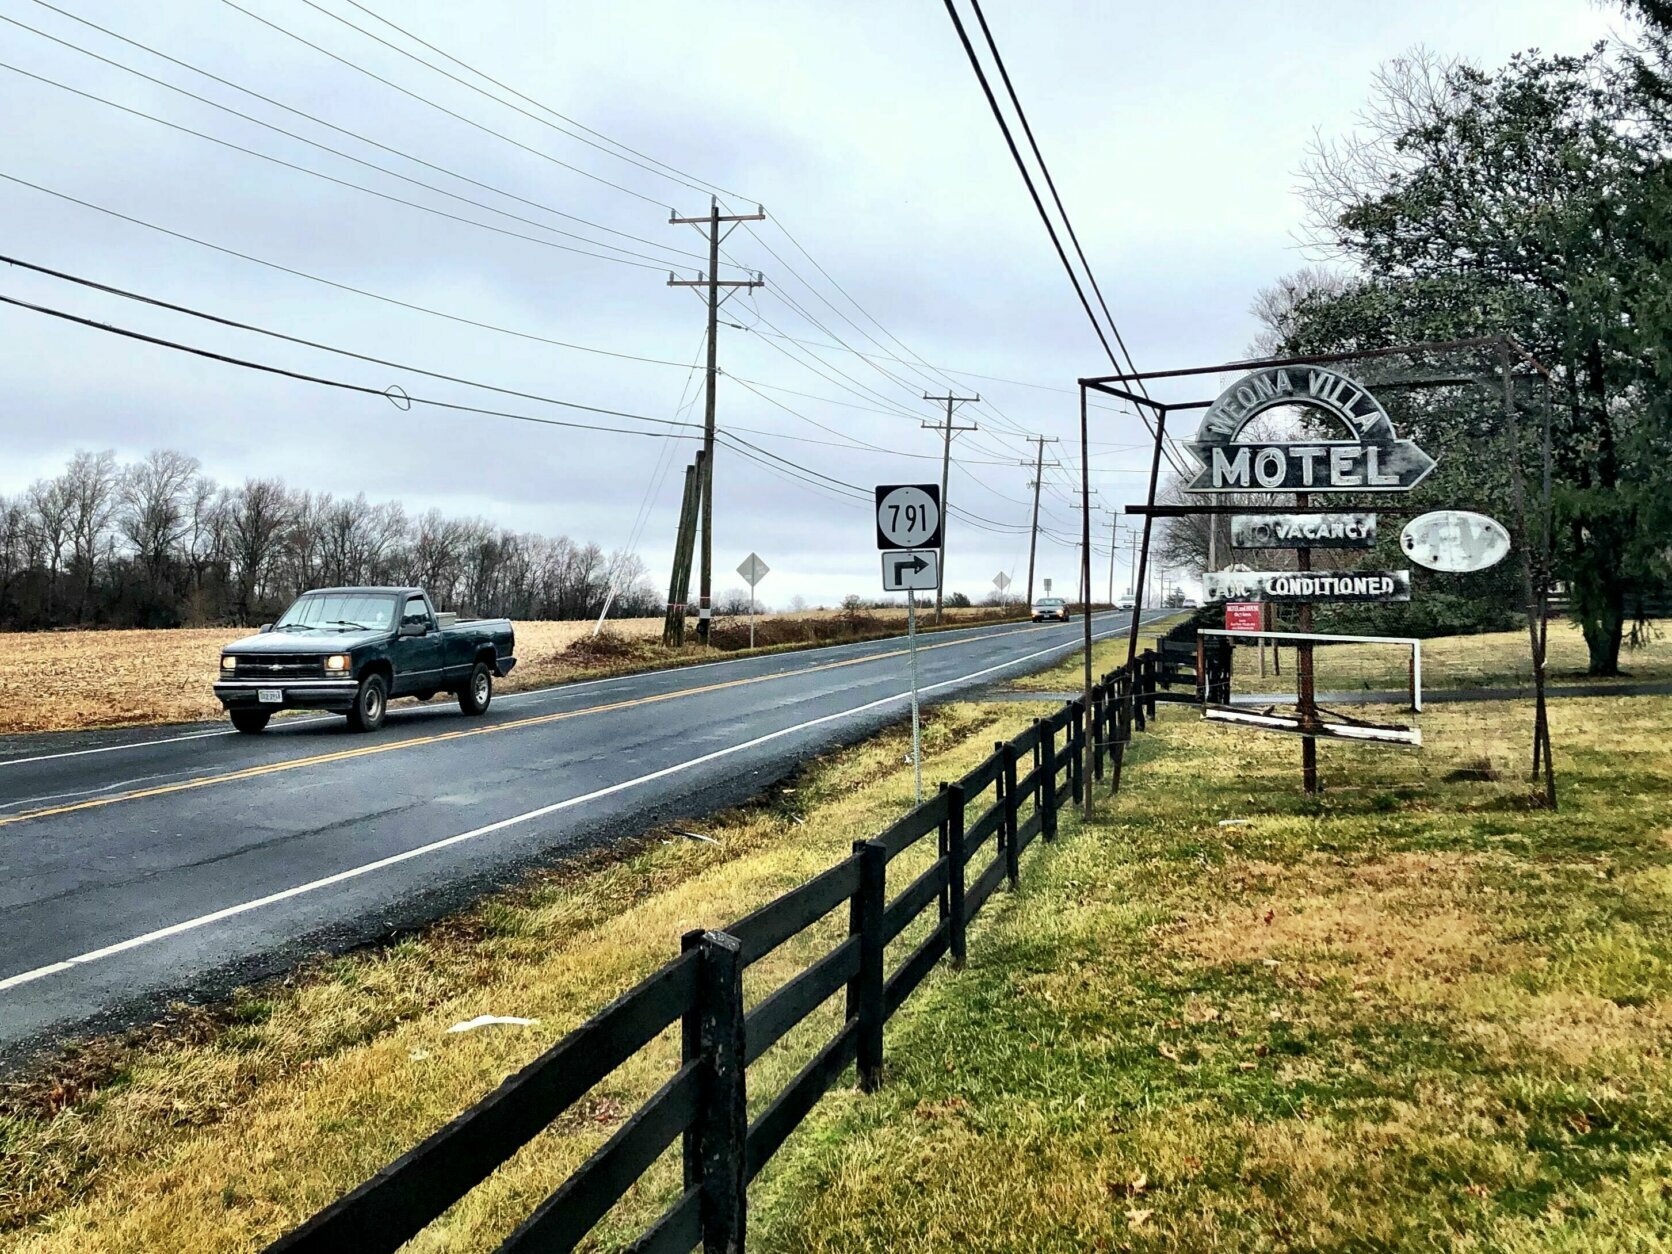 <p>The Round Hill Town Council voted last week to make it possible to extend town water and sewer facilities to the former motel site, which sits outside of town limits, if the project meets certain criteria, including maintaining the historic character of the town, established in 1900.</p>
